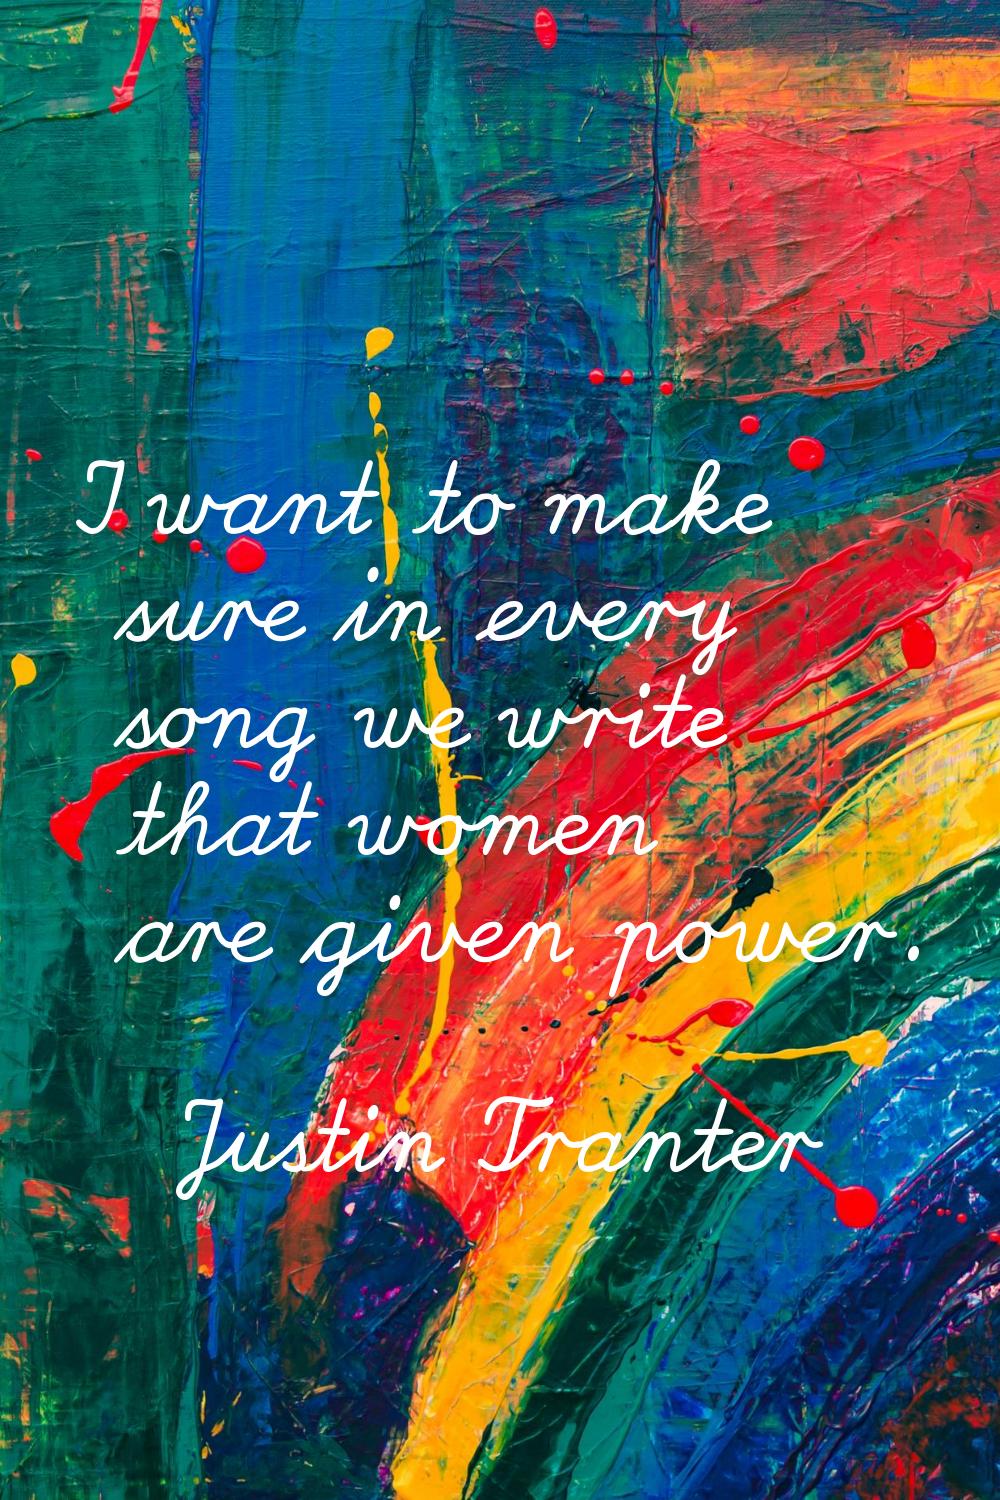 I want to make sure in every song we write that women are given power.